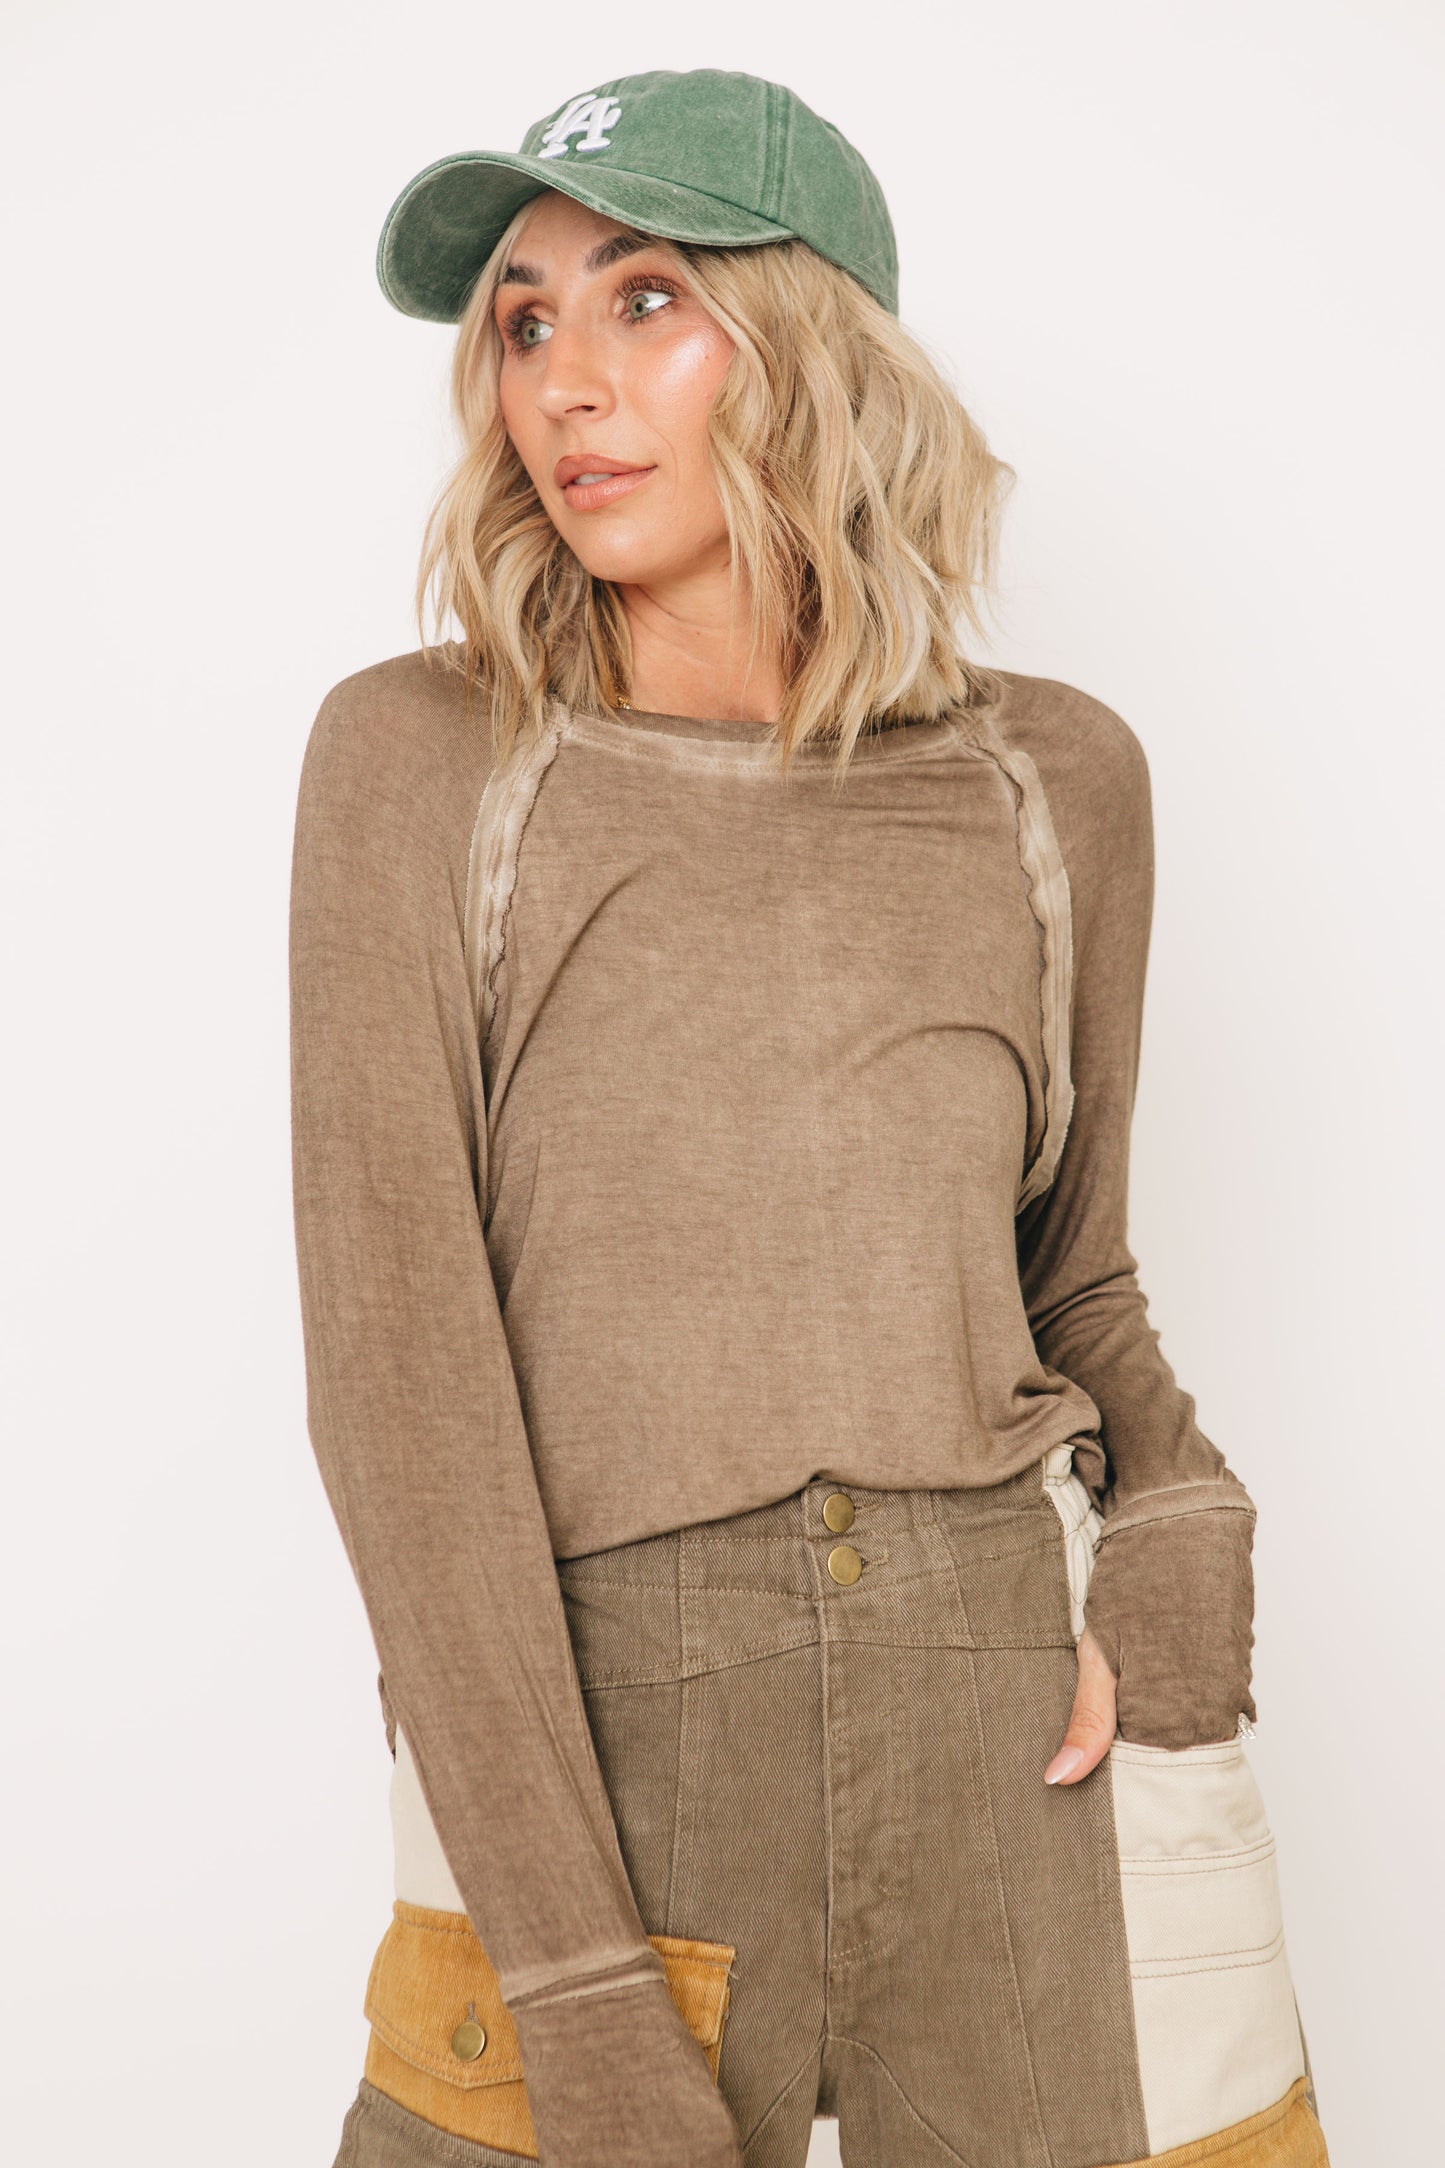 Doorbuster - Mineral Washed Long Sleeve Top (S-L)